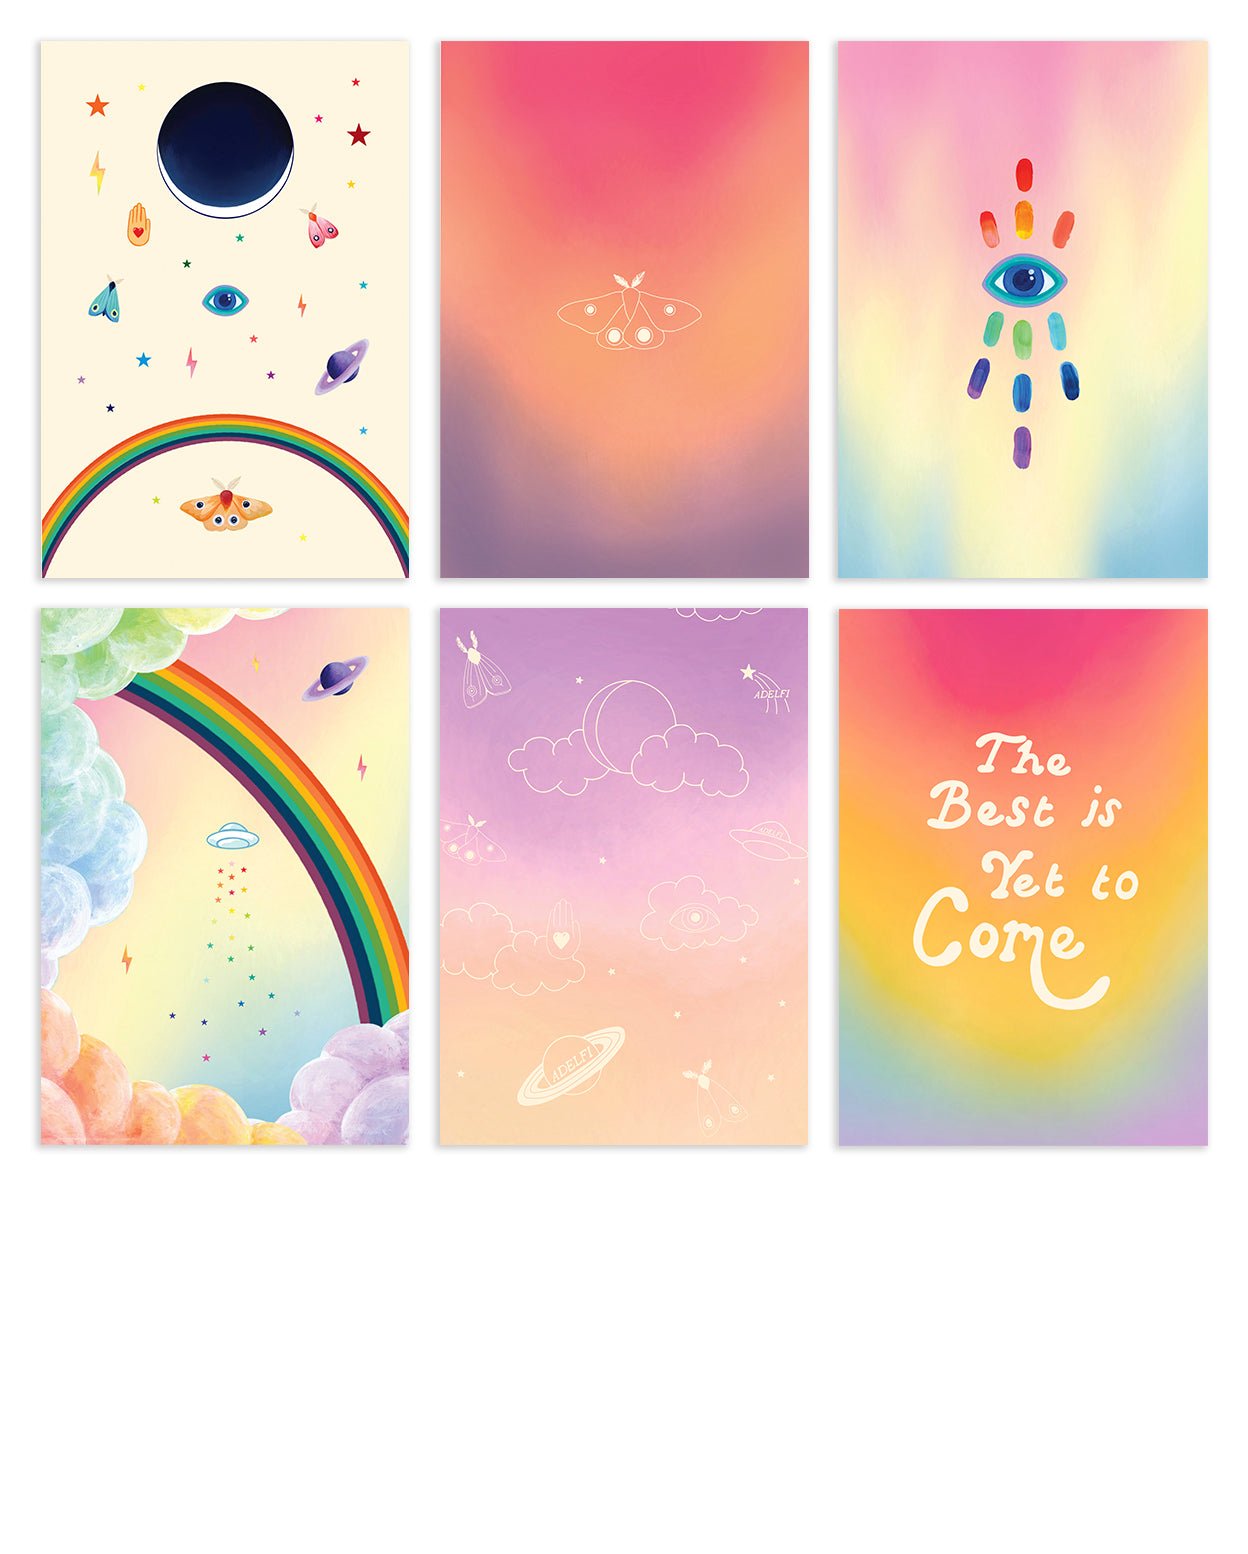 Neon icons postcard pack with variations of design. Cream colored card with an eclipse and varying neon icons. A pink, orange, and purple gradient sky with a hollow white moth on top. A pink, yellow, and blue gradient sky with a blue evil eye on top and rainbow-colored streaks. Rainbow clouds with a rainbow and varying neon icons on a pink, yellow and blue gradient sky. Hollow neon icons on a purple and orange ombre background. Rainbow gradient with center-aligned bold text "The Best is Yet to Come."